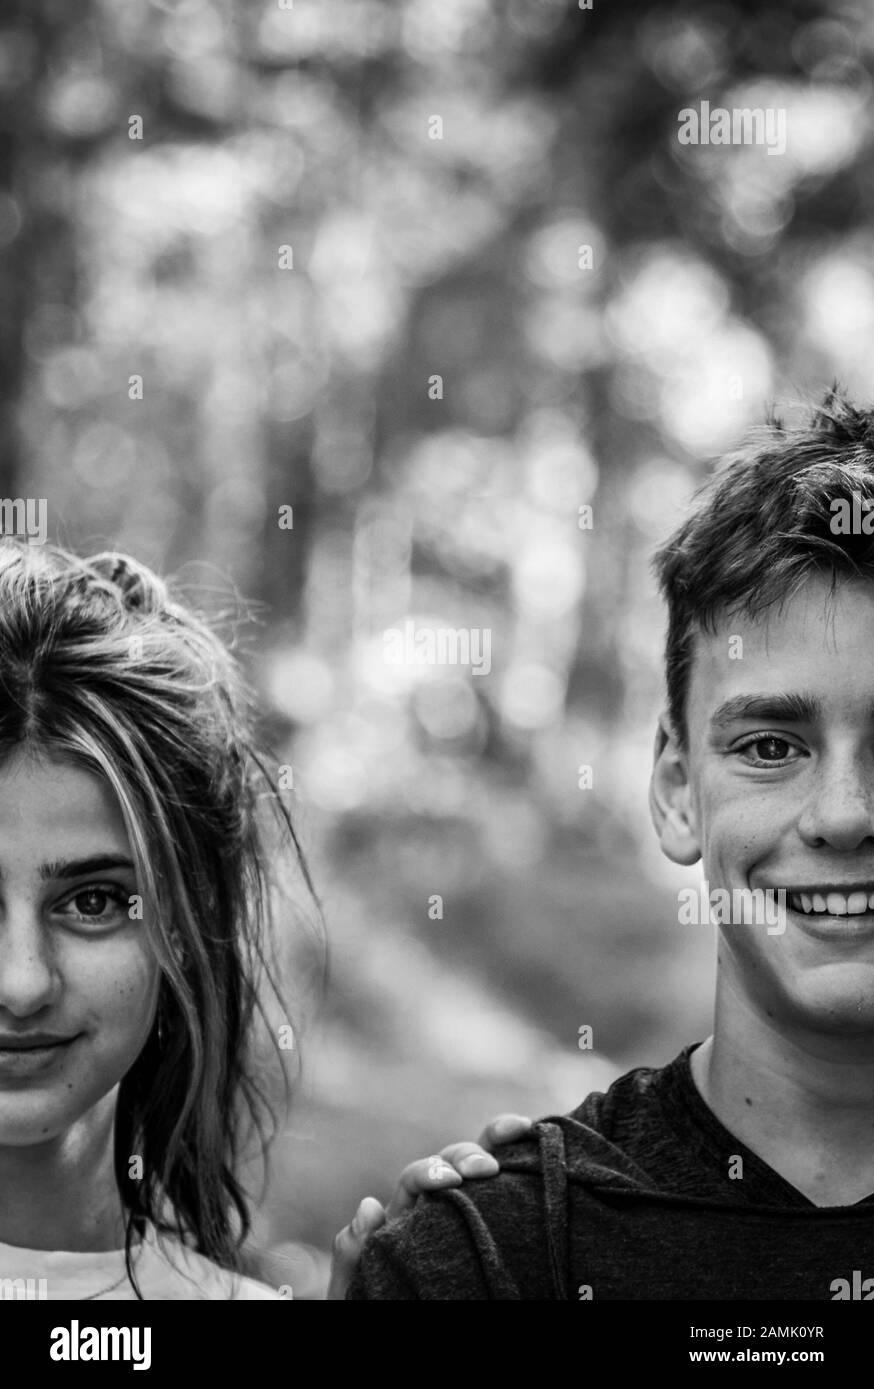 Black and white creative portrait of teen boy and girl brother